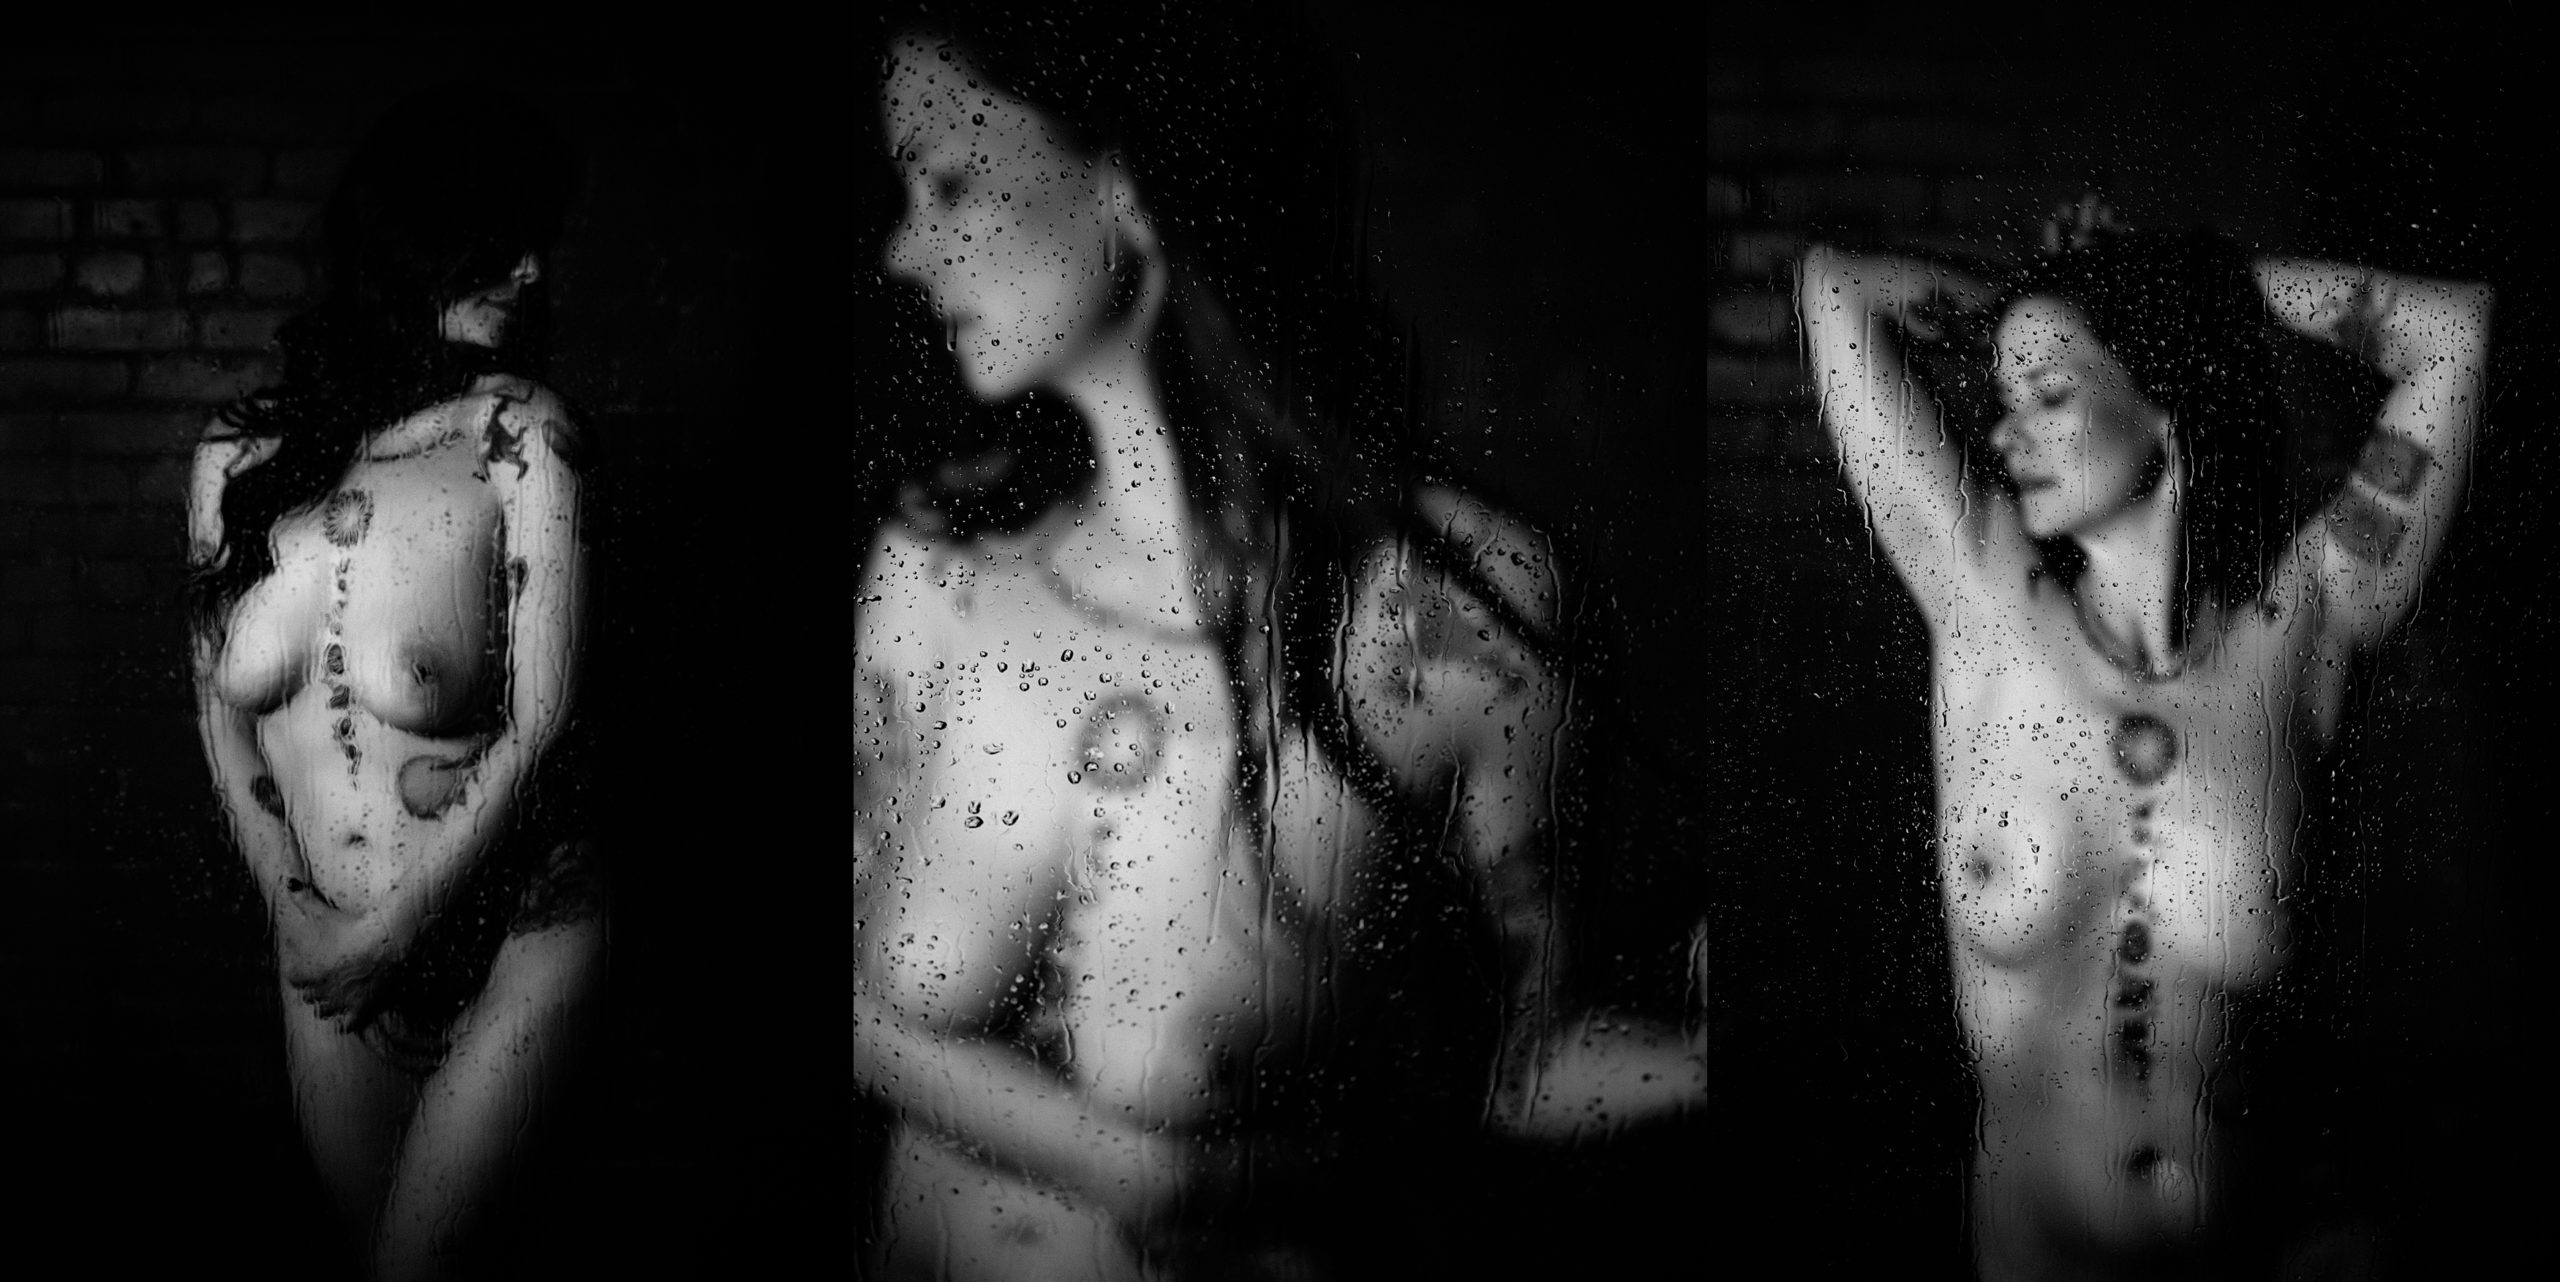 Three black and white images of a woman during a boudoir session, she is in the shower. In the first image she has her head turned away to the camera, she is fully nude and is holding her hands together in front of her. The second image is focused on the water drops on the shower door, she is out of focus but you can see her head is turned away from the camera. The third image she is facing the camera with her arms up in her hair, face is turned to the side.